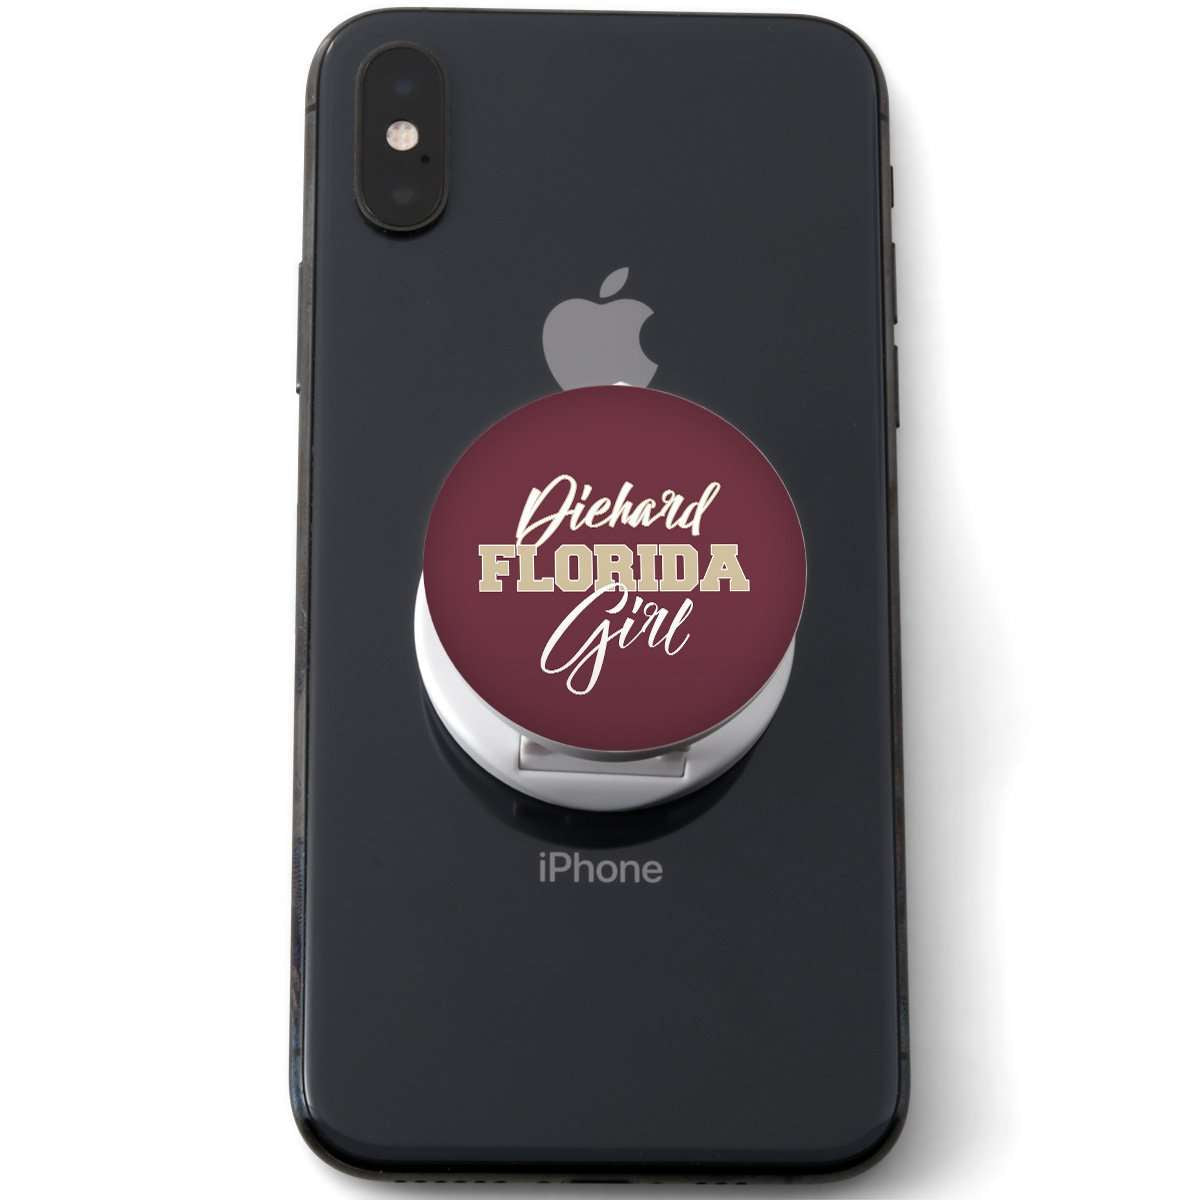 Designs by MyUtopia Shout Out:Diehard Florida Girl Script Hinged Pop-out Phone Grip and stand for Smartphones and Tablets